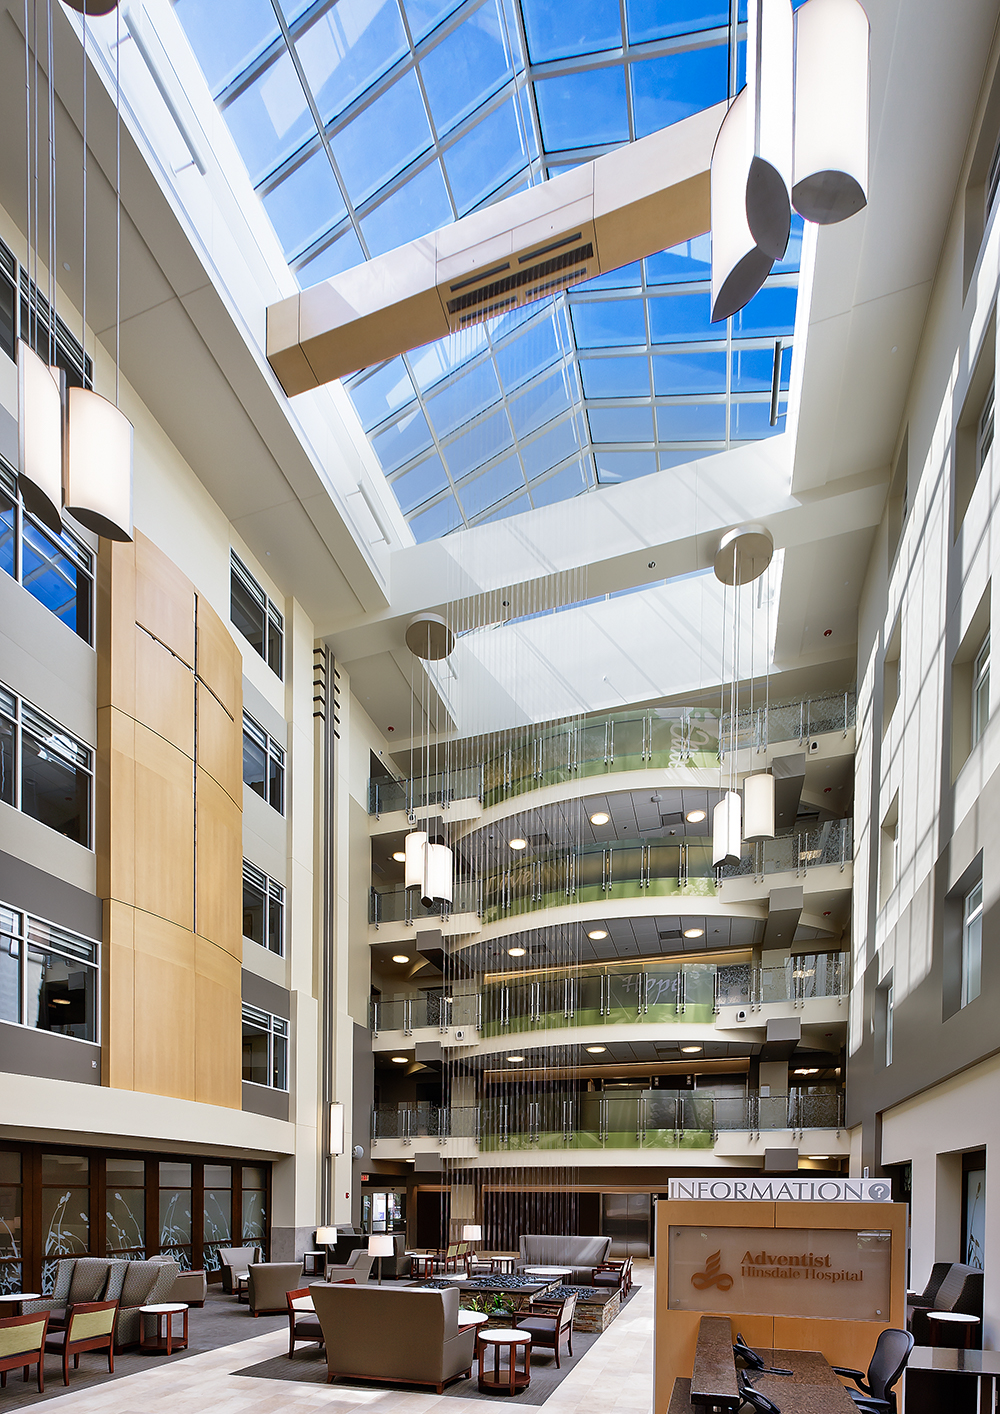 Air Foil pendants in a hospital lighting its large atrium with clean, diffused light.